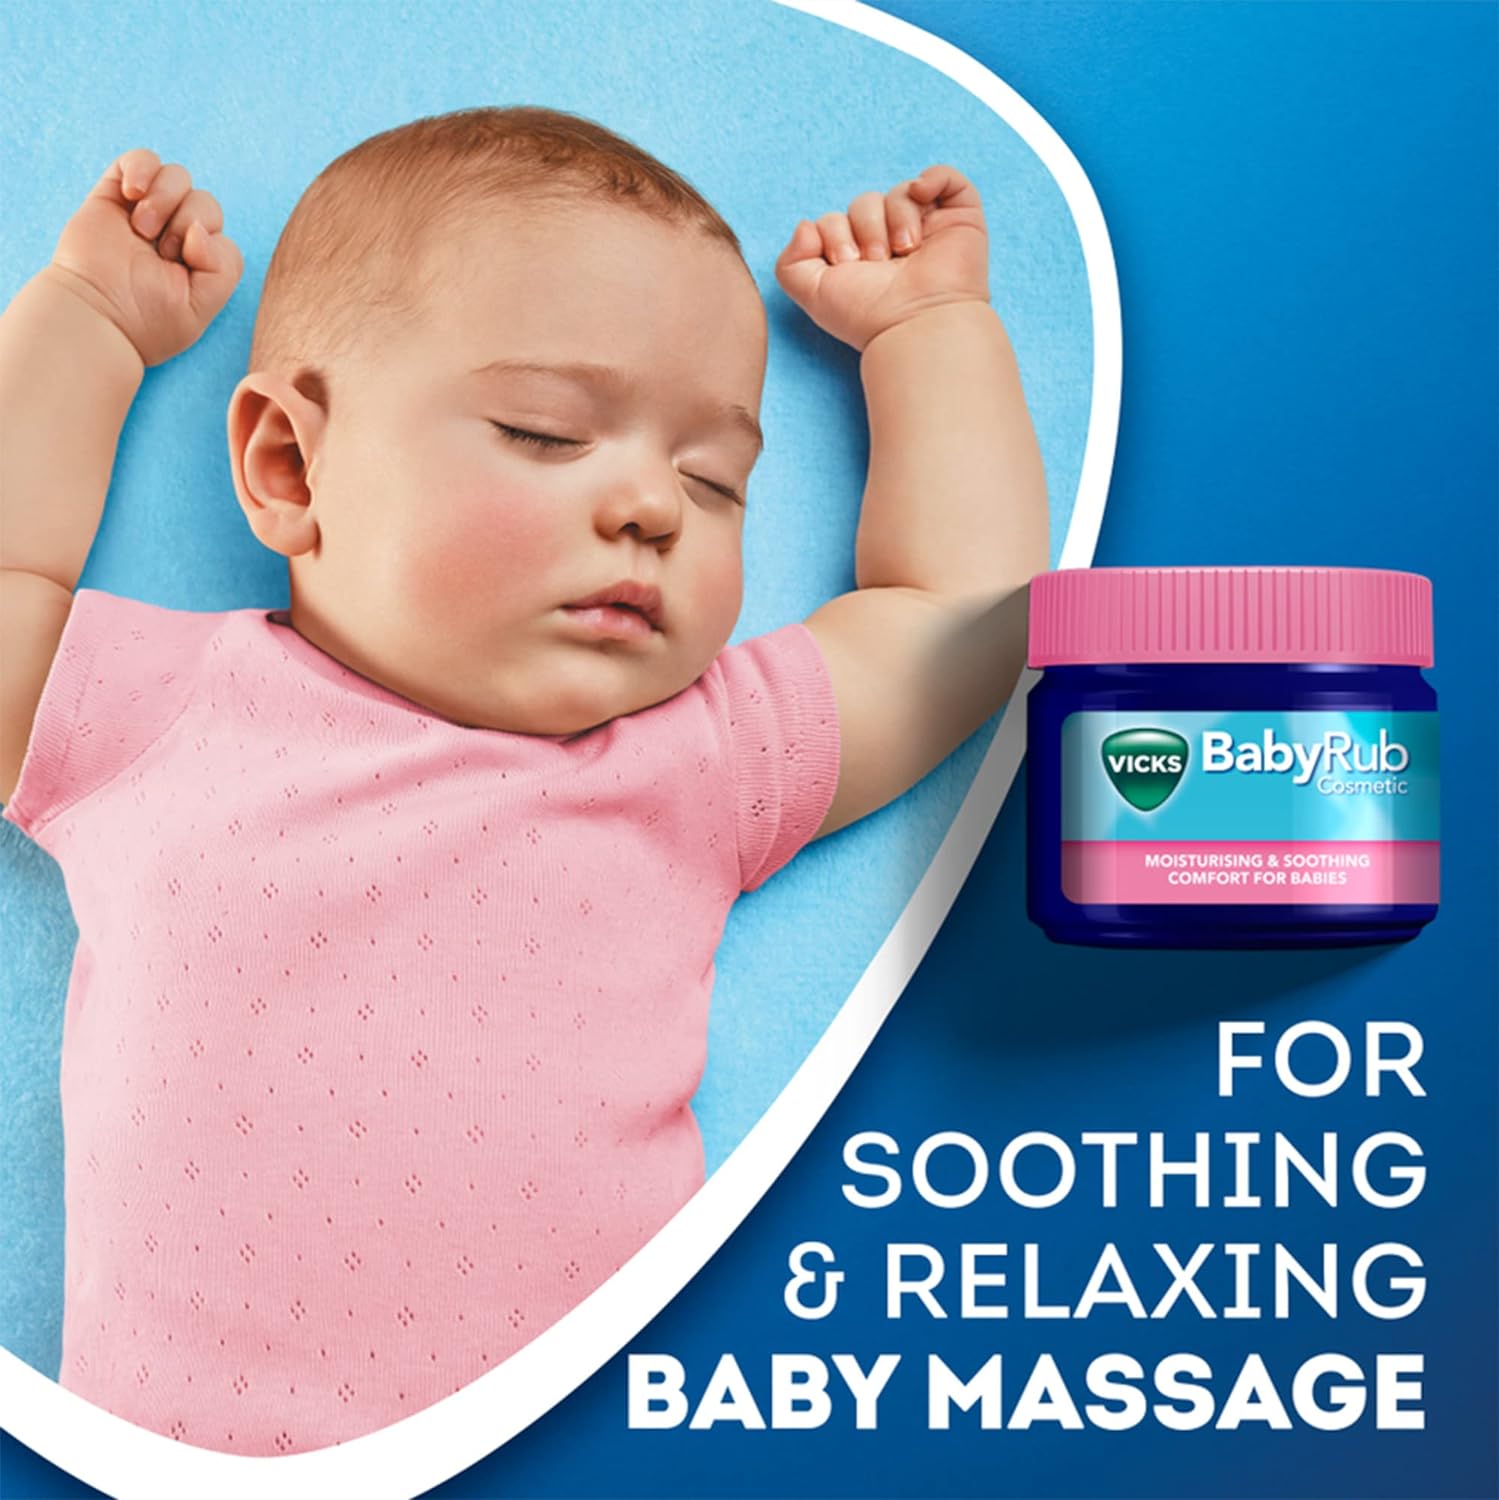 Vicks BabyRub Ointment 6 Months +, with Fragrances Of Rosemary And Lavender, for Soothing and Relaxing Baby Massage Jar 50g